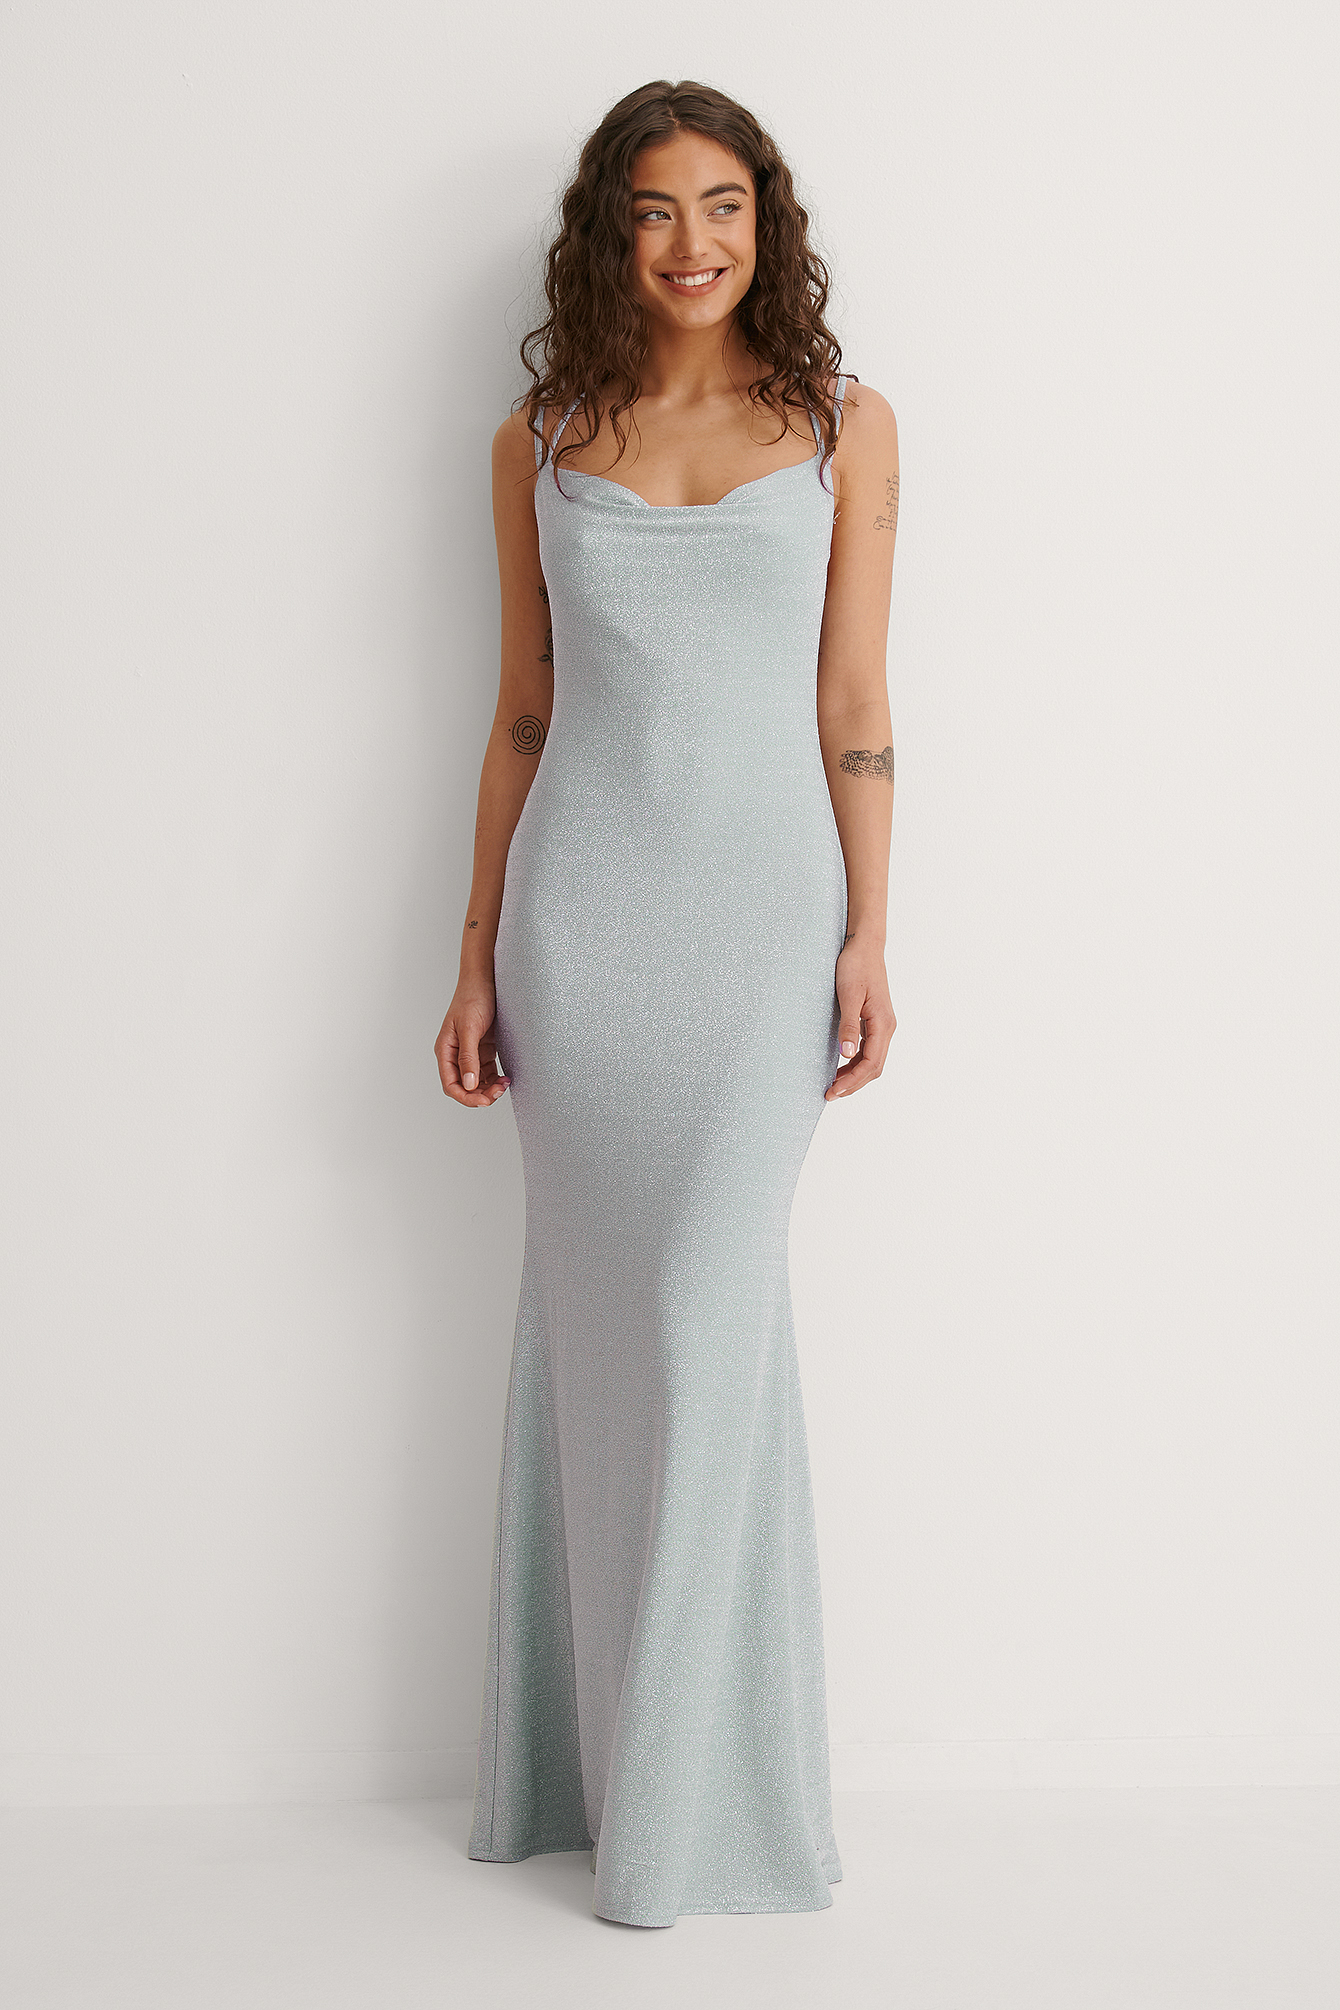 Waterfall Slit Back Maxi Dress Outfit